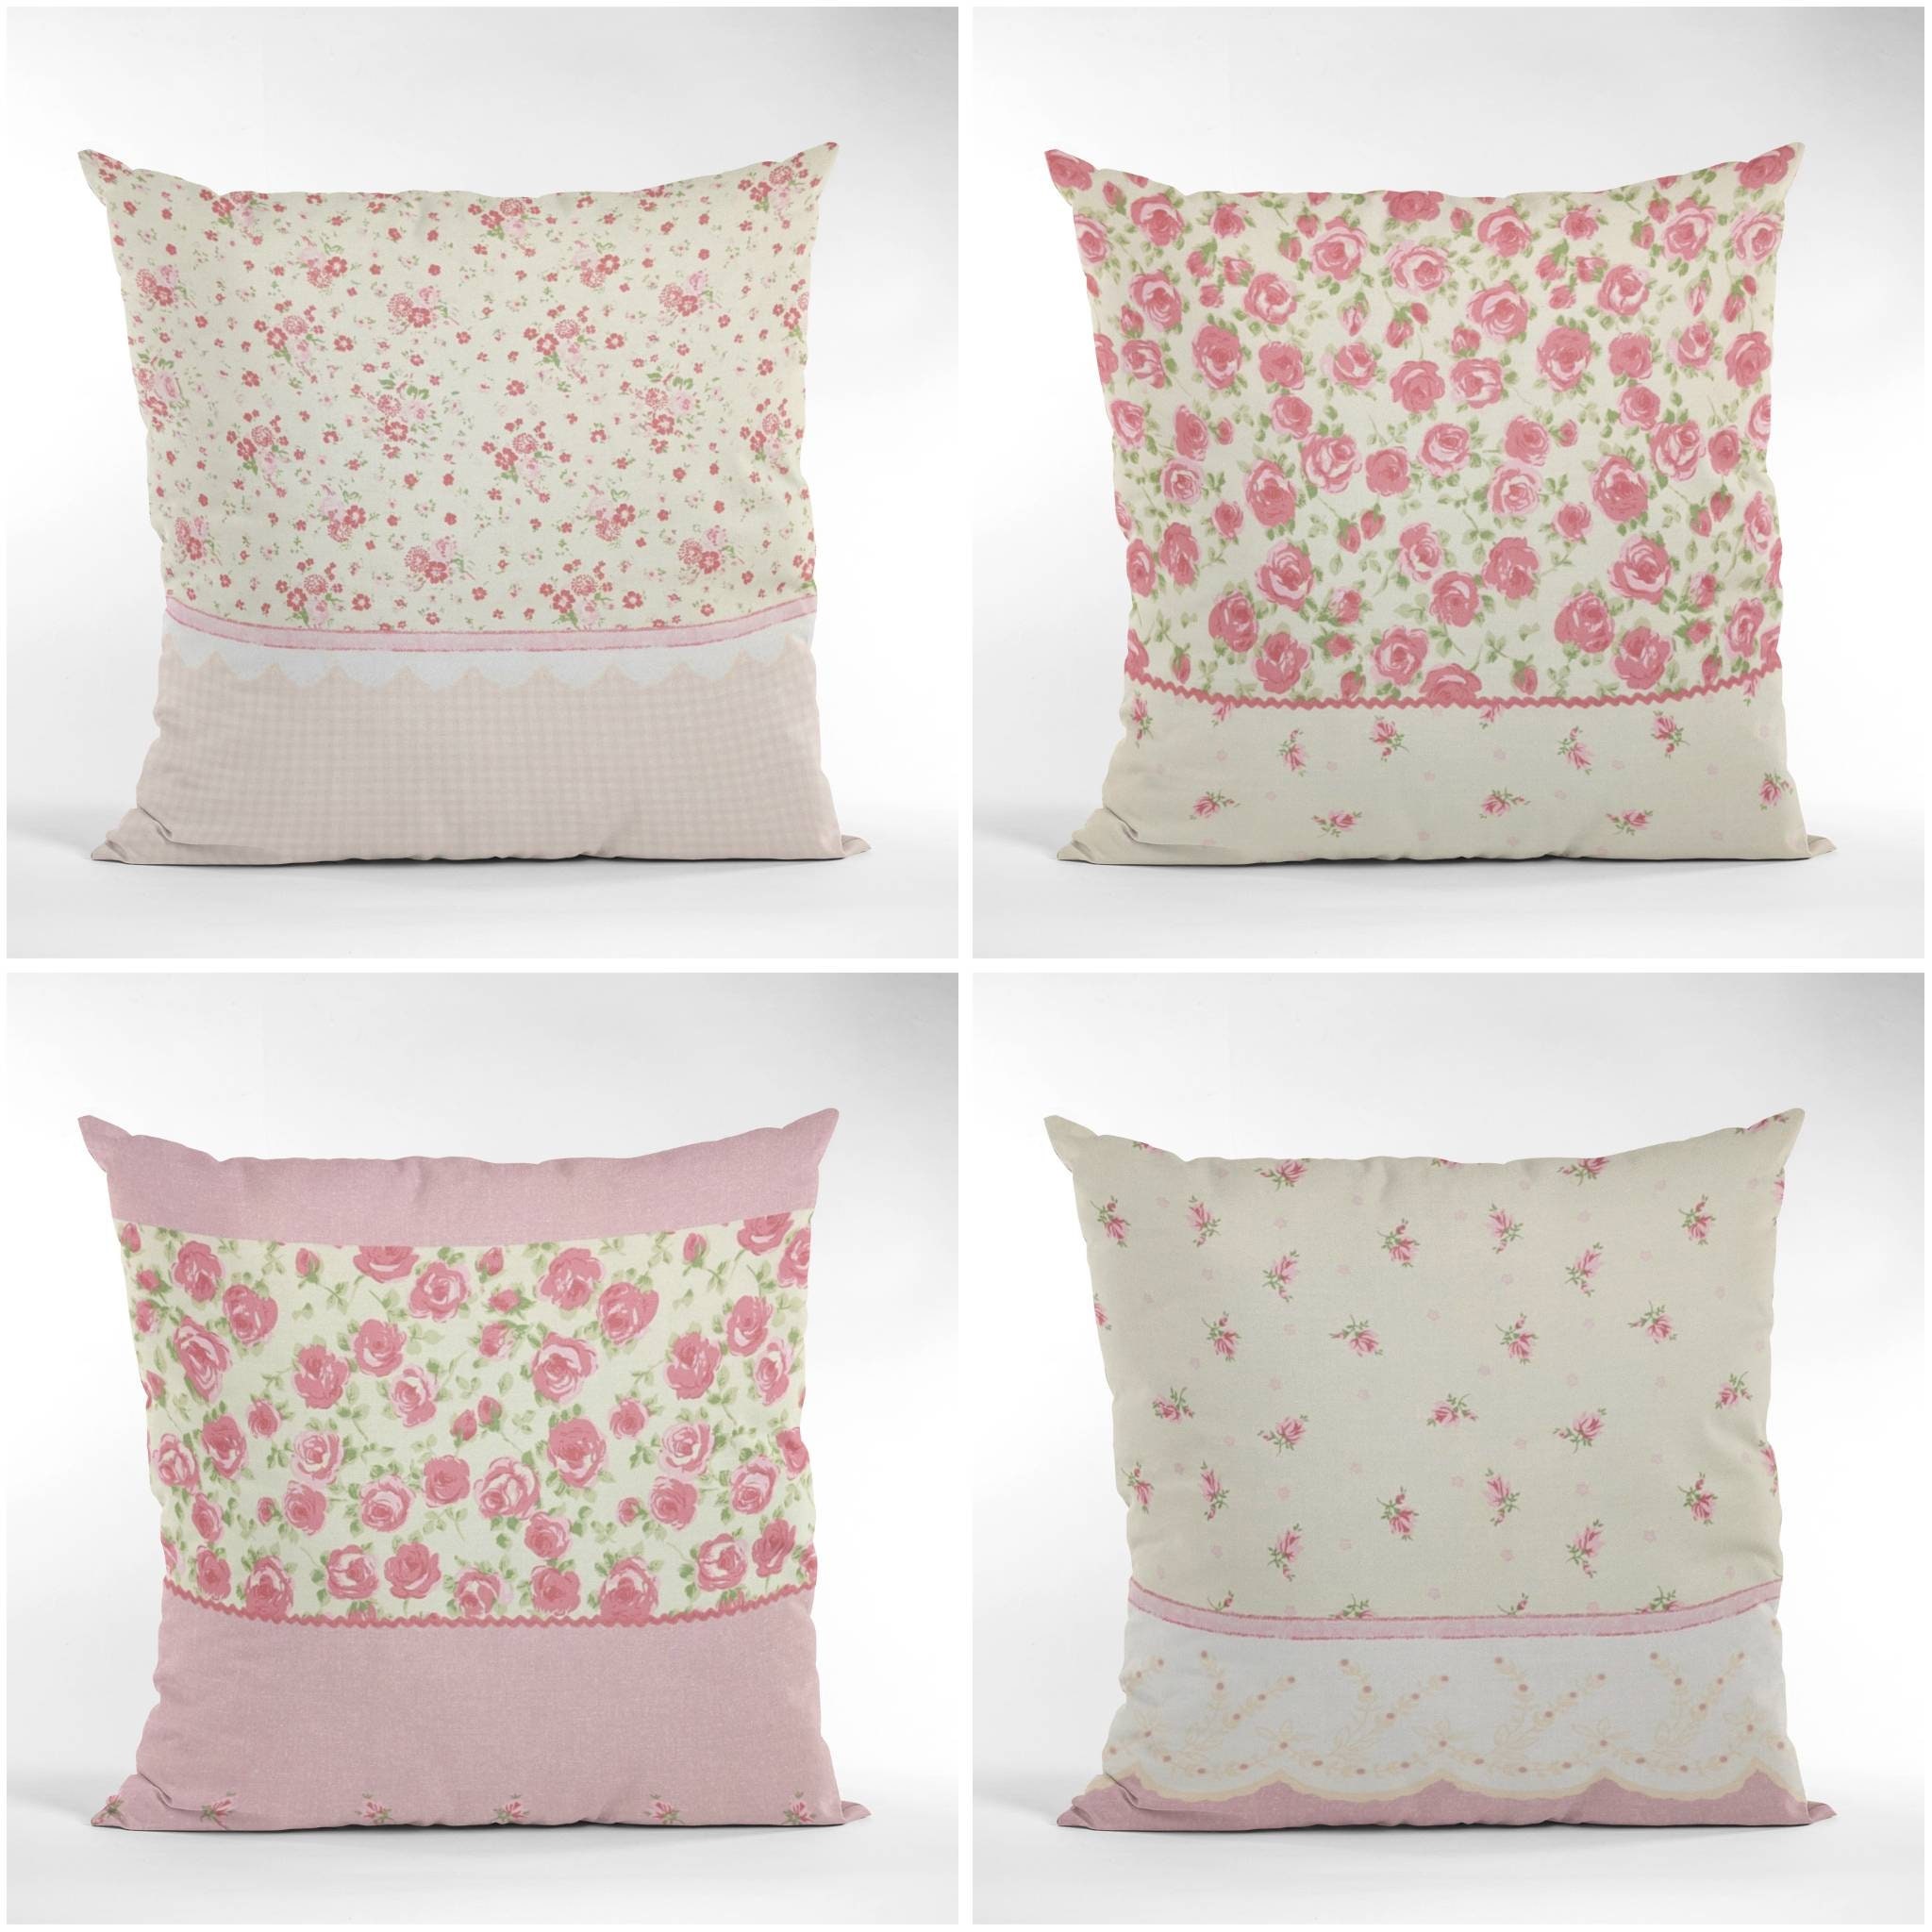 16" Pink Patchwork Vintage Floral Cushion Cover Shabby Chic,Country Cottage 